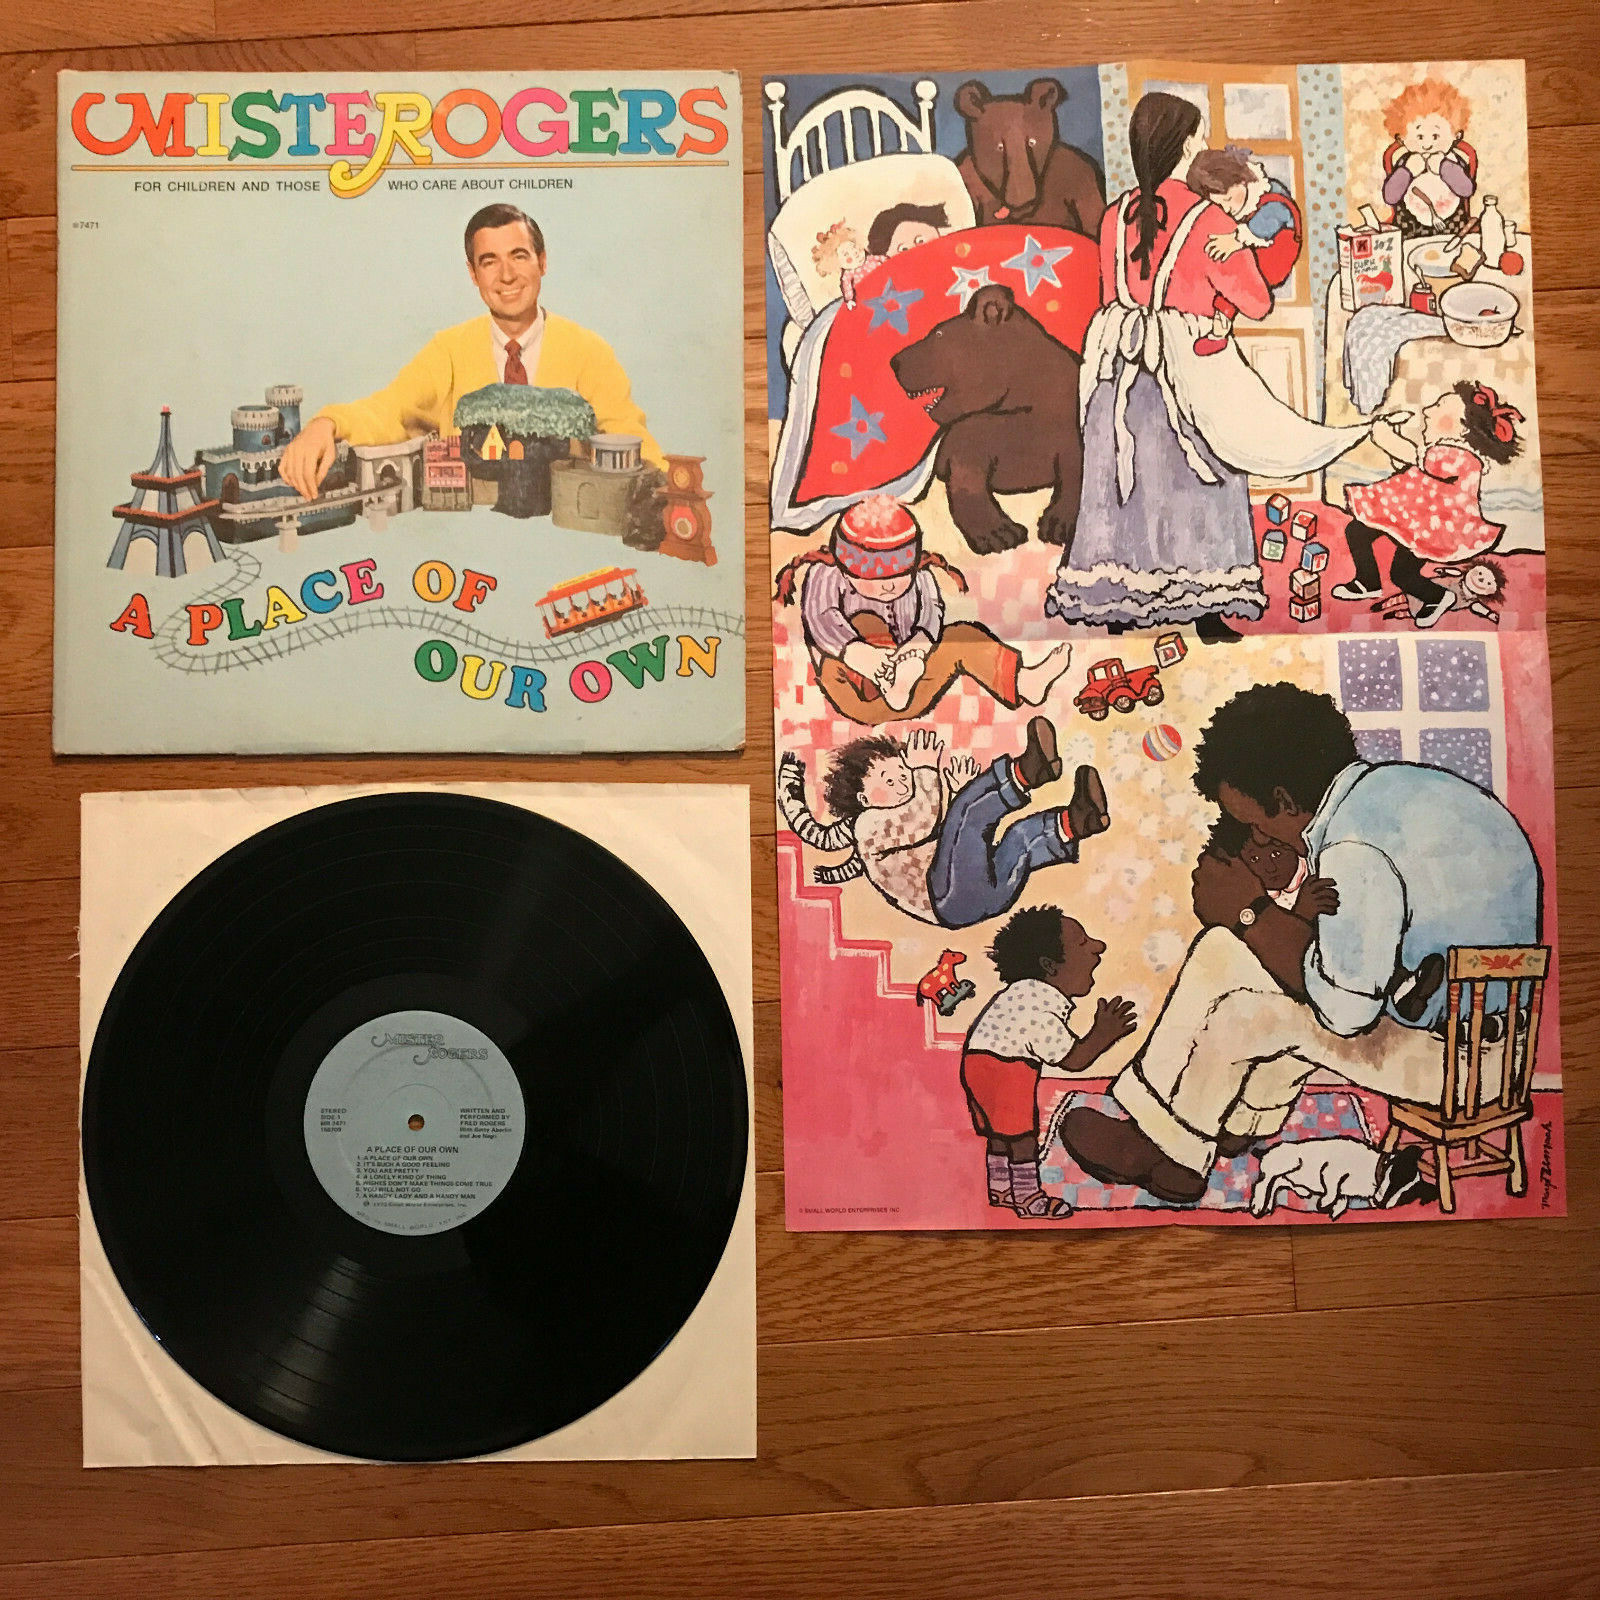 Mister Rogers - A Place of Our Own LP Small World MR-7471 Mr 1973 w/ Poster  VG+